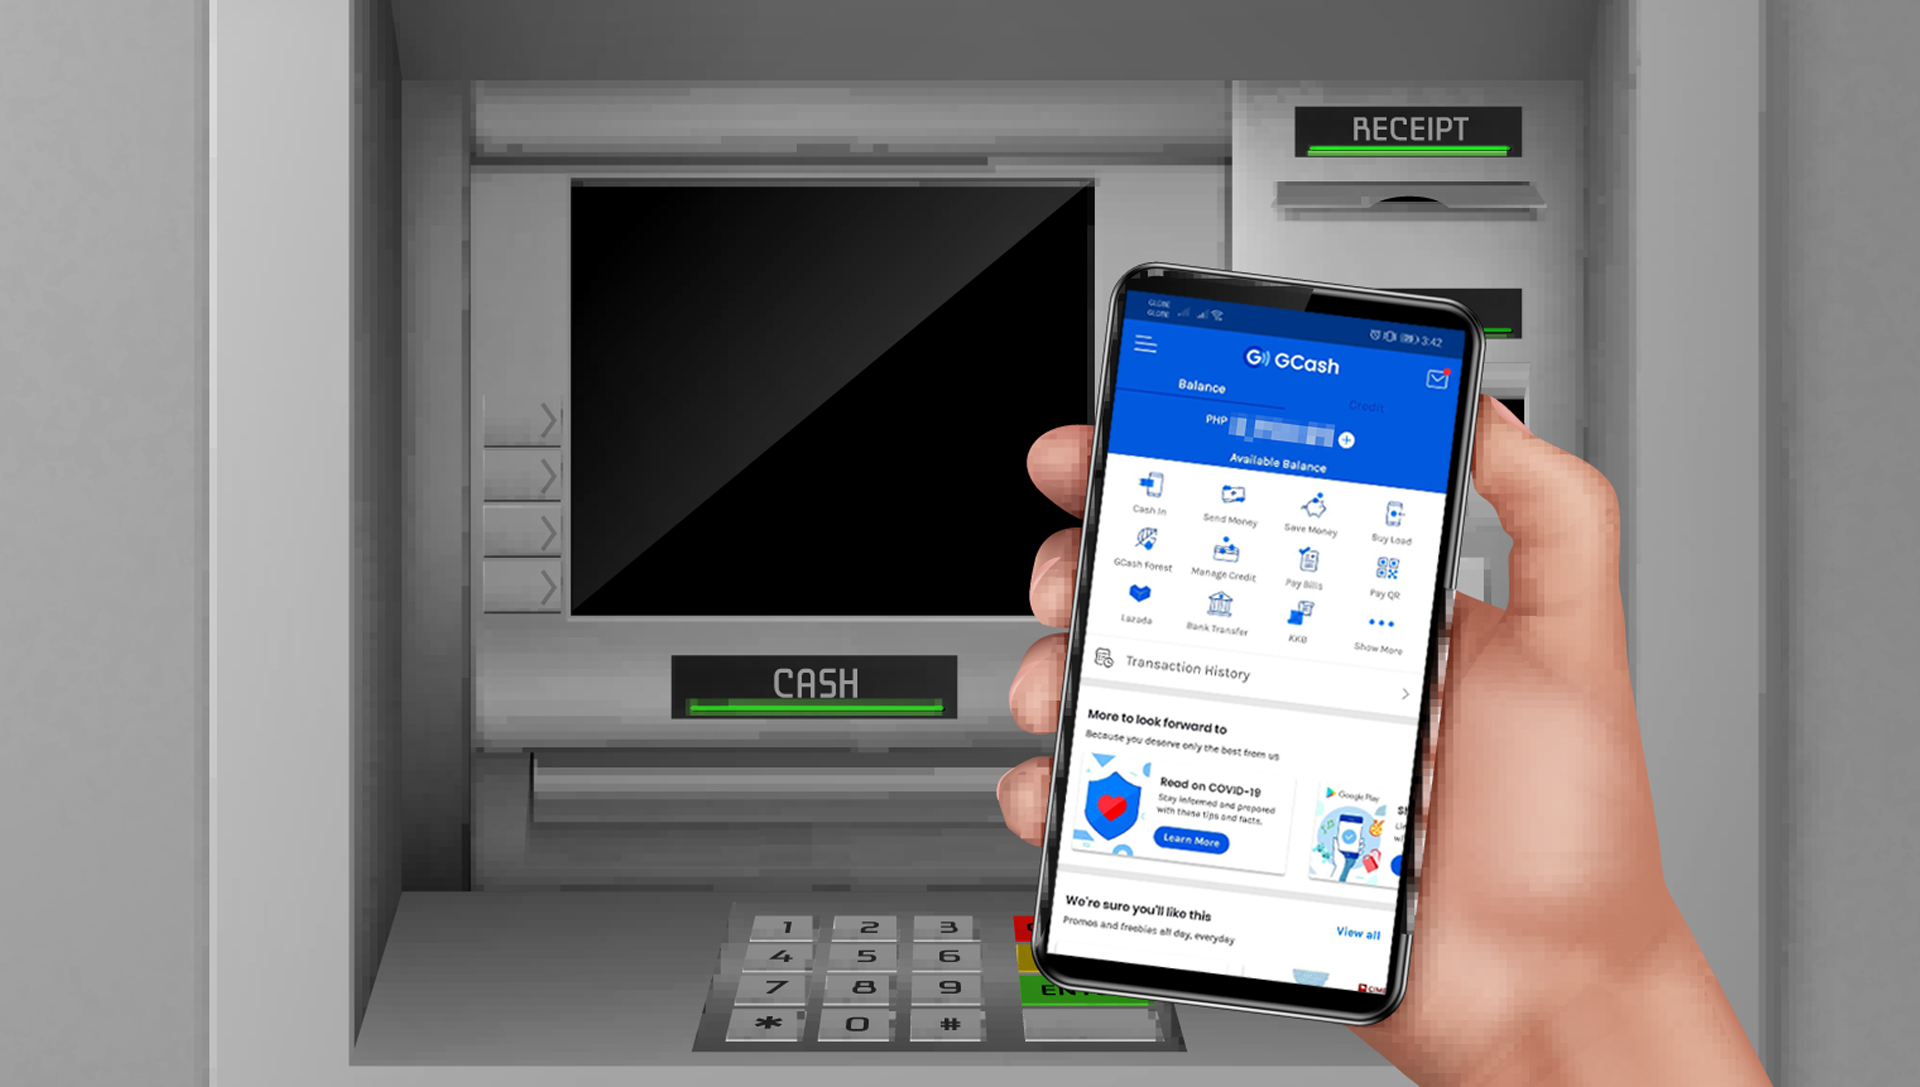 How to Cash Out GCash in Different Ways